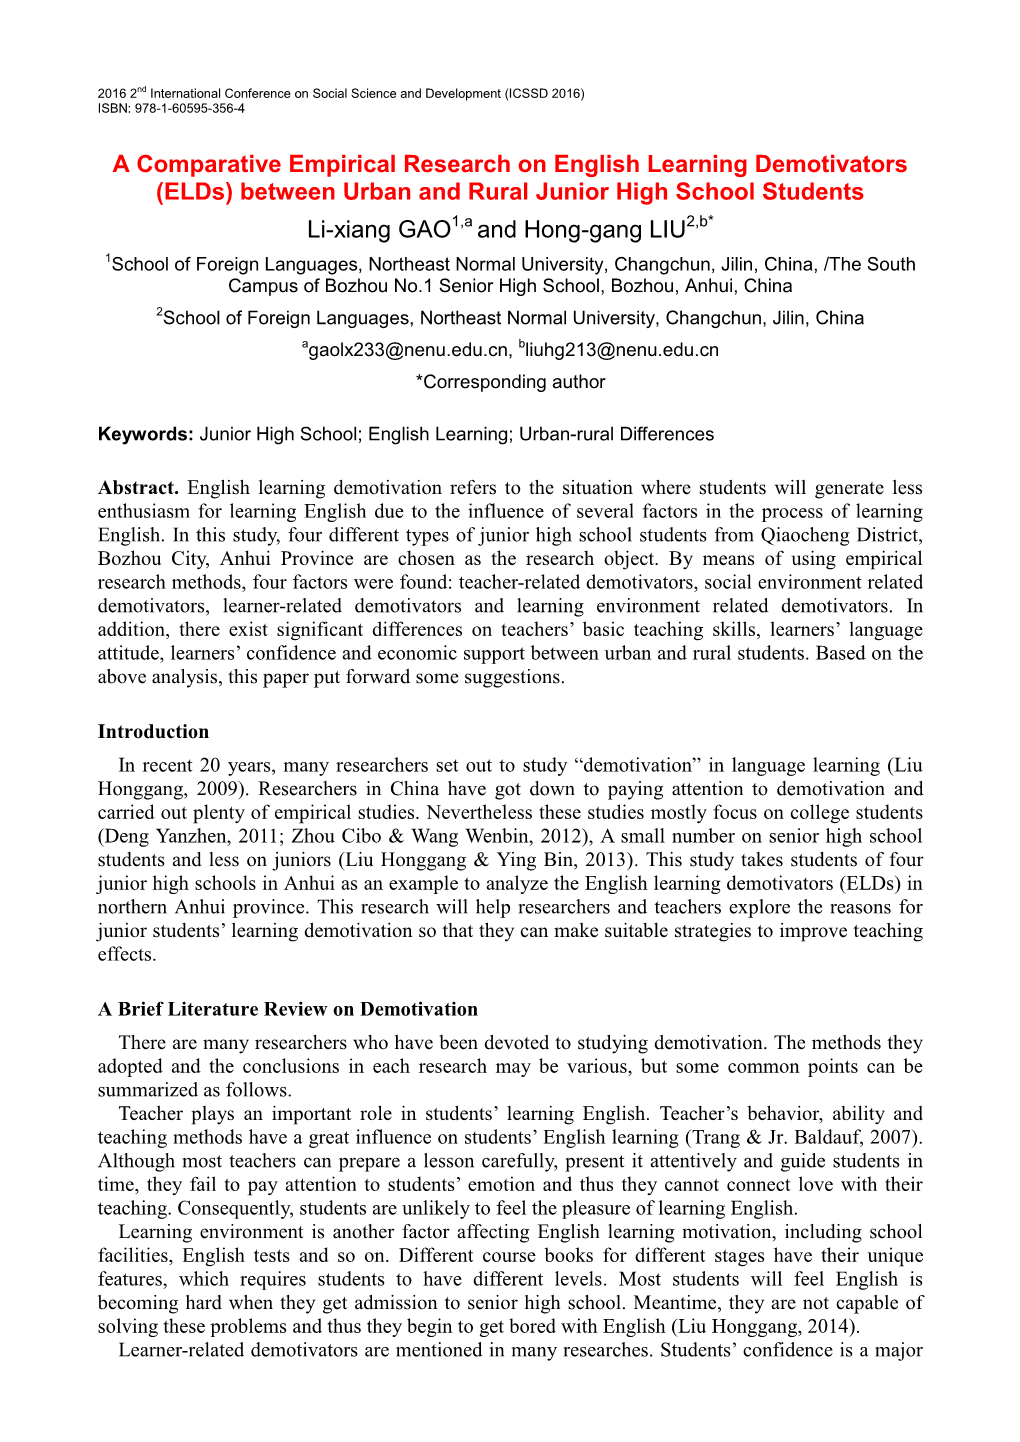 A Comparative Empirical Research on English Learning Demotivators